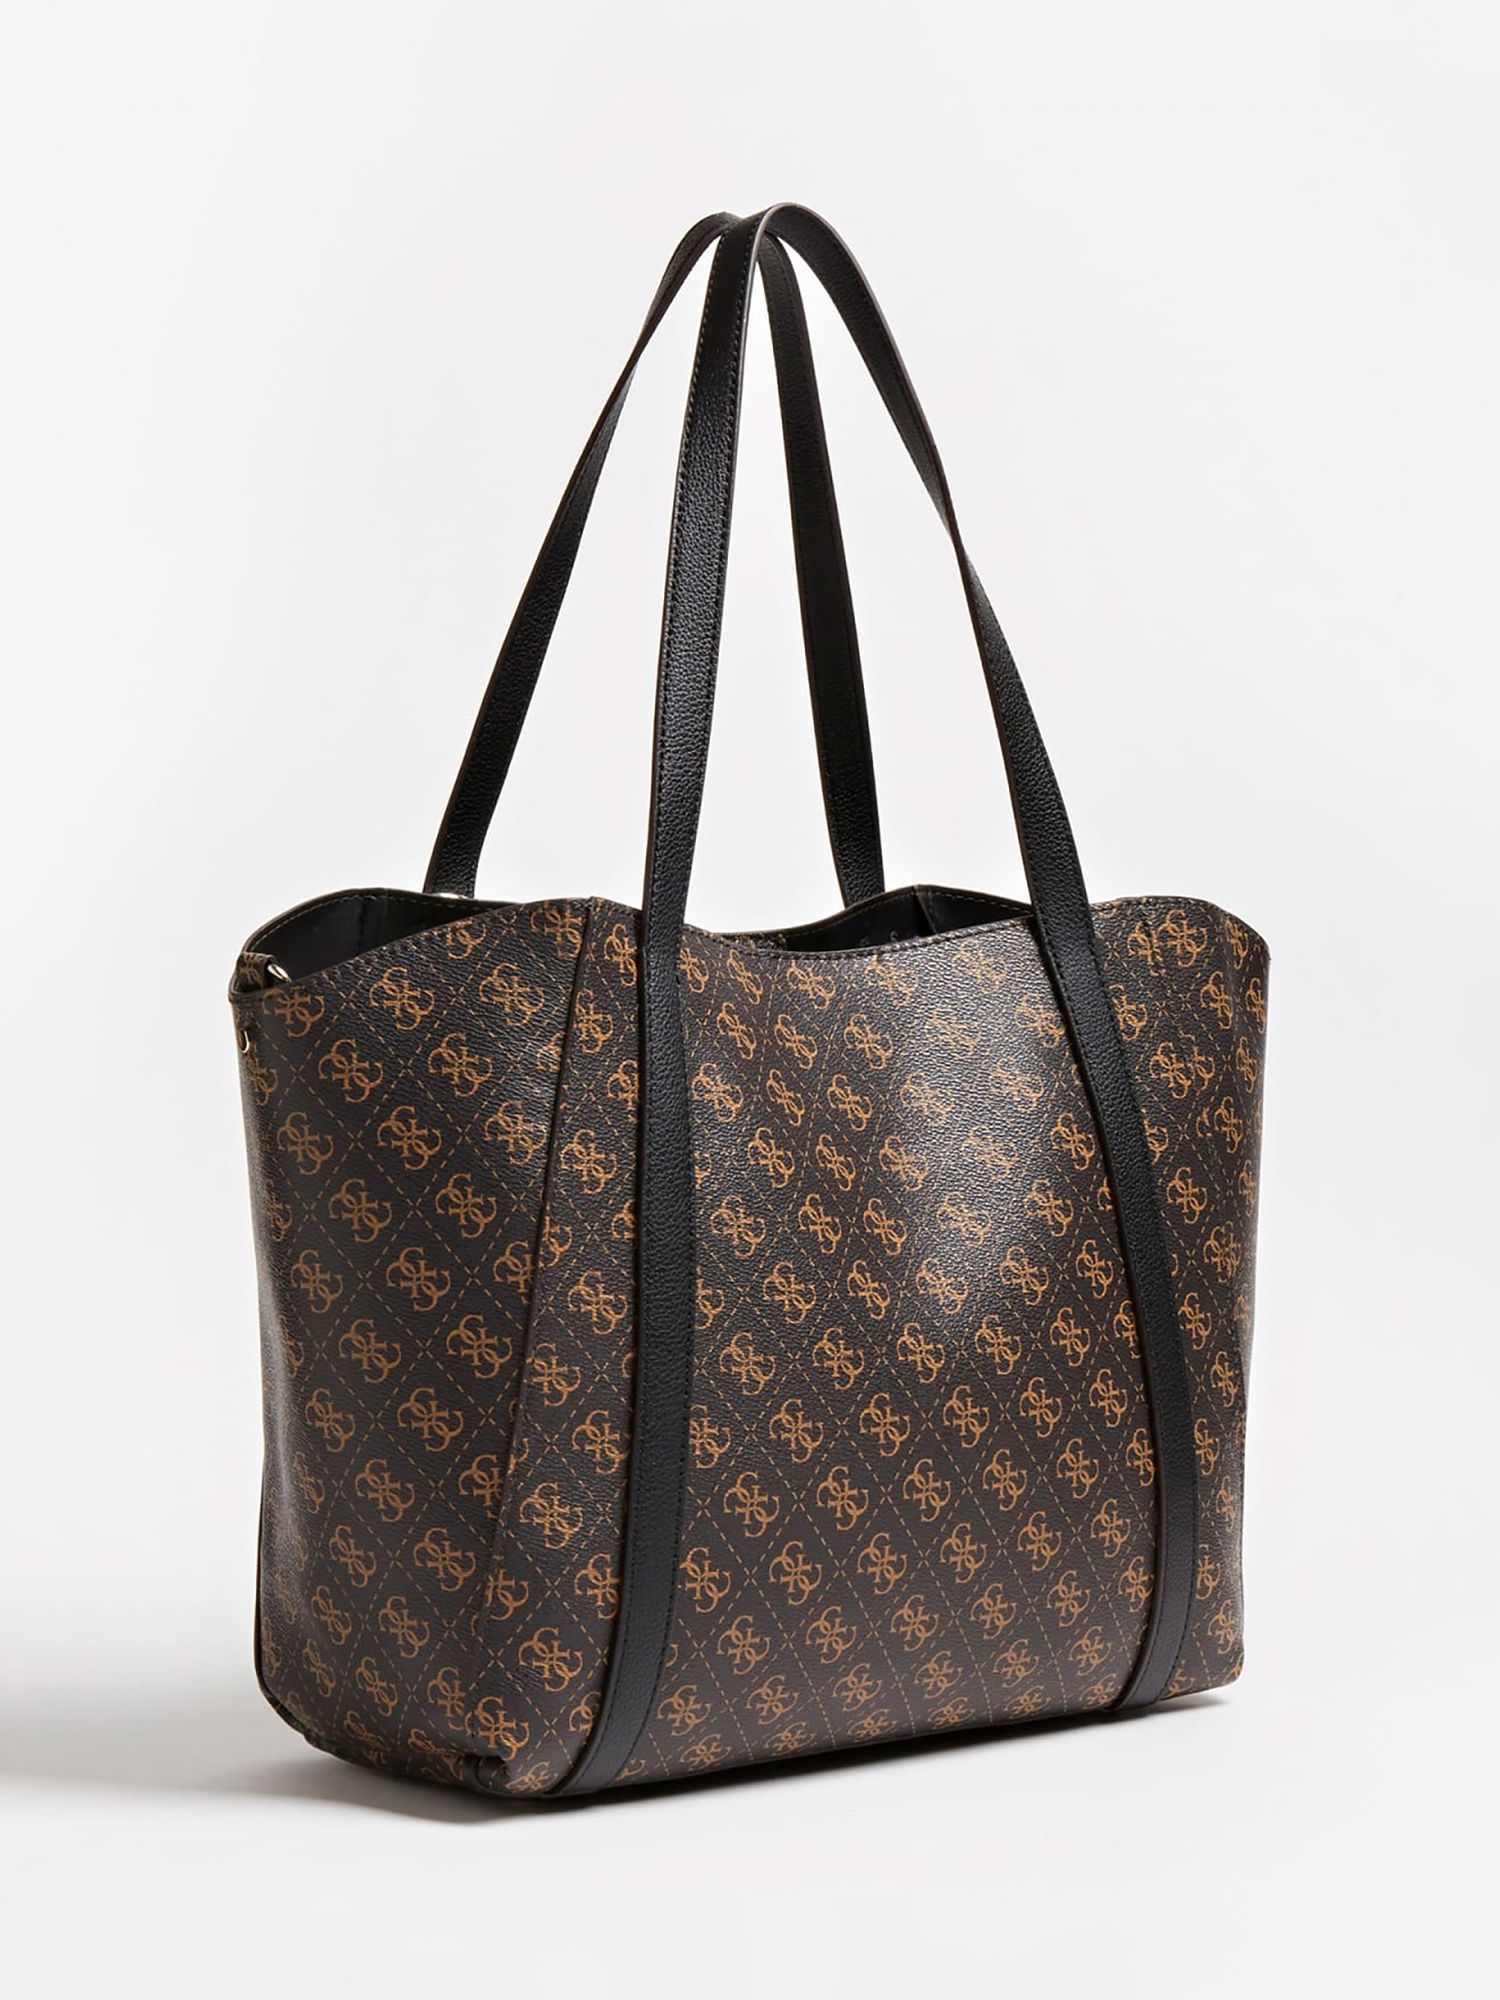 Artist revamps a toilet seat with Louis Vuitton bags that costed